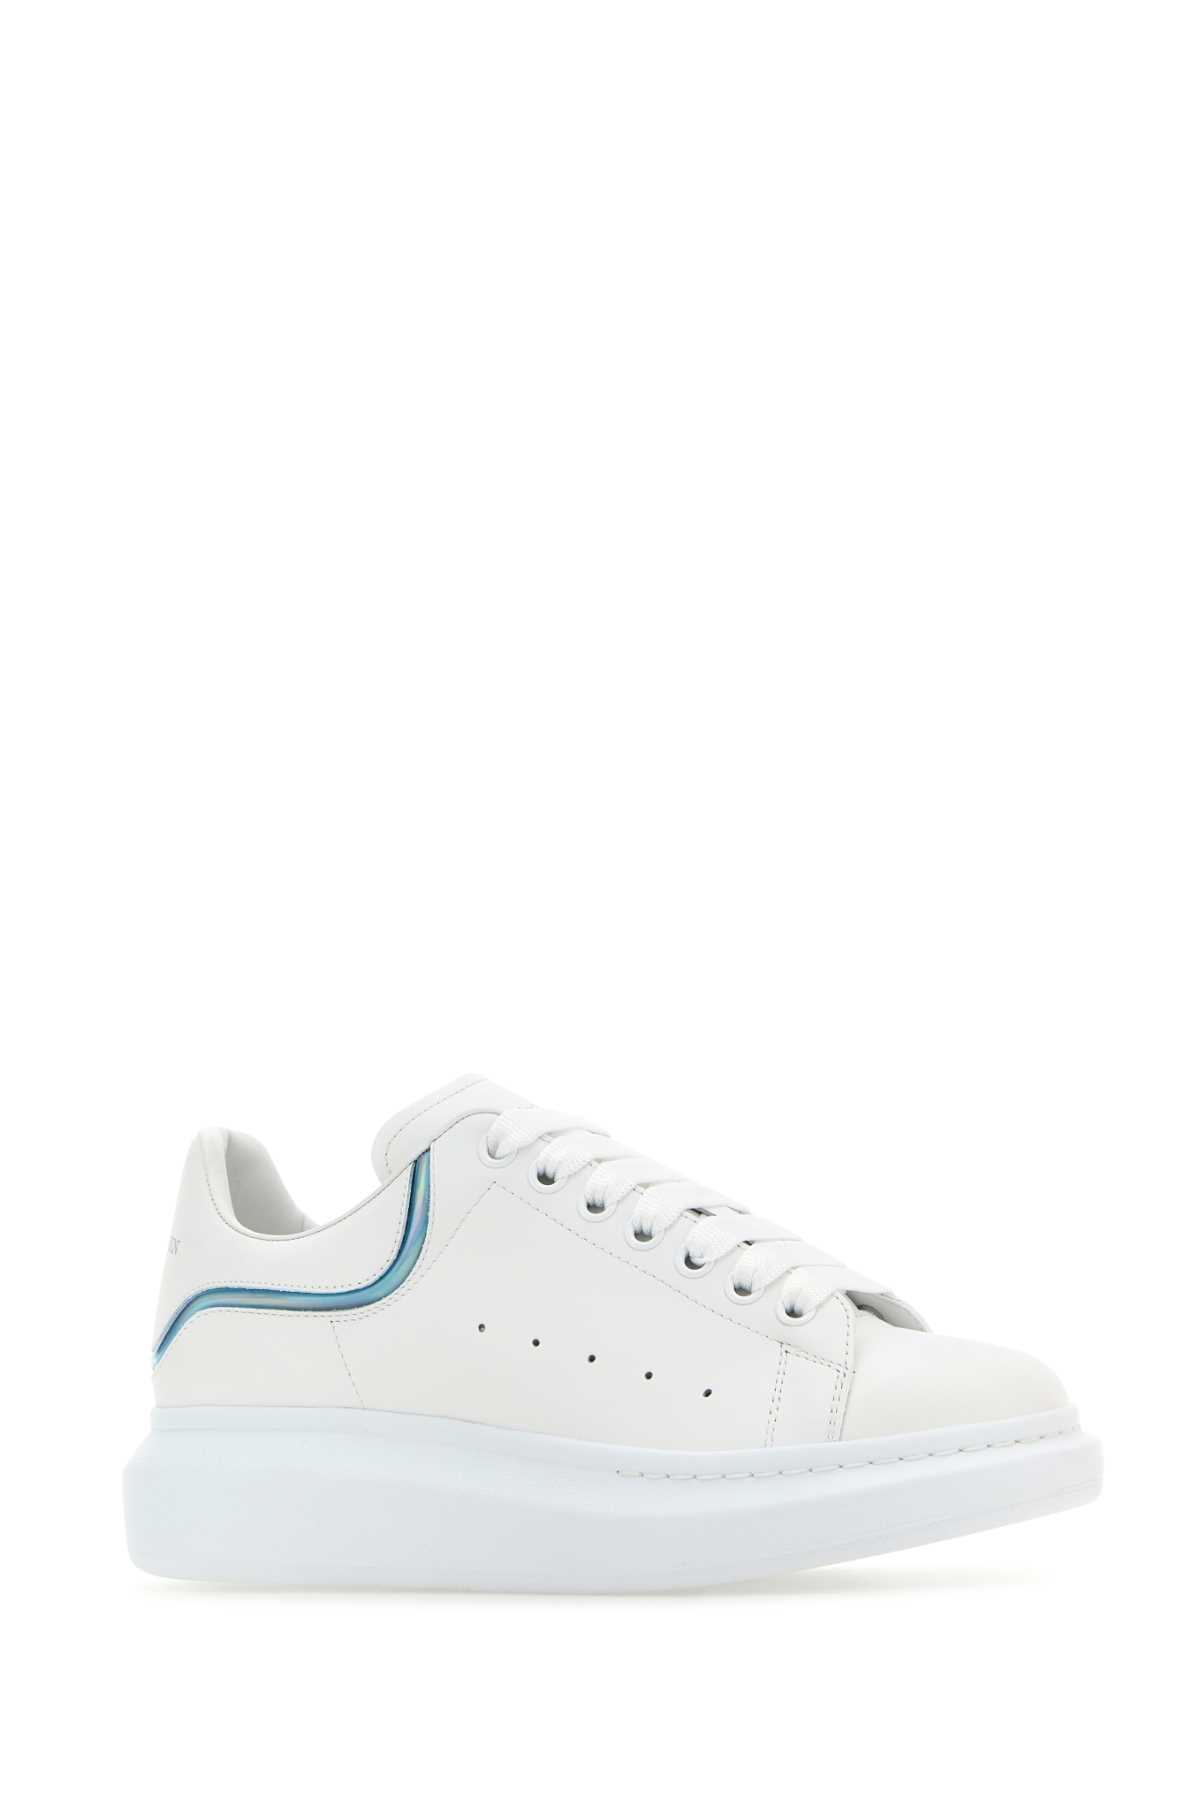 Shop Alexander Mcqueen White Leather Sneakers With White Leather Heel In Whiteparadiseblue